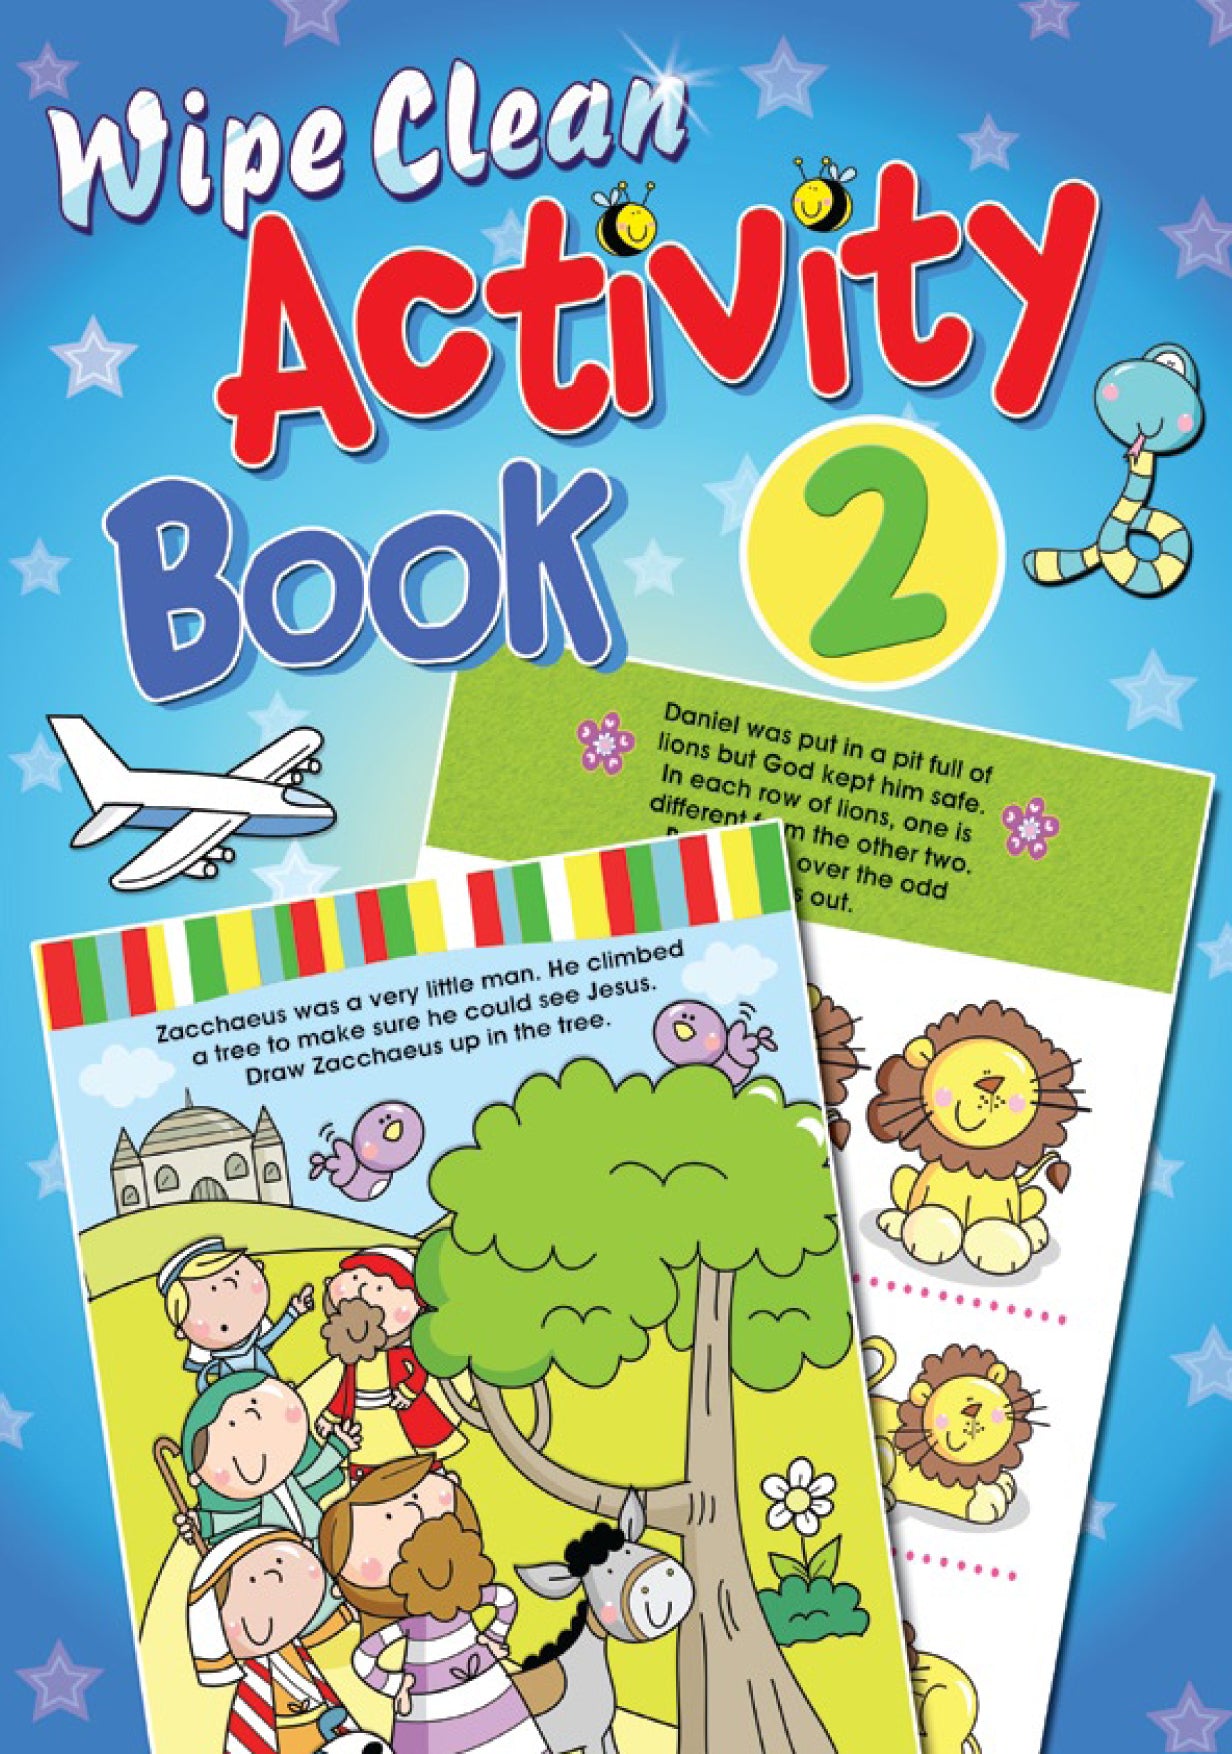 Image of Wipe Clean Activity Book 2 other